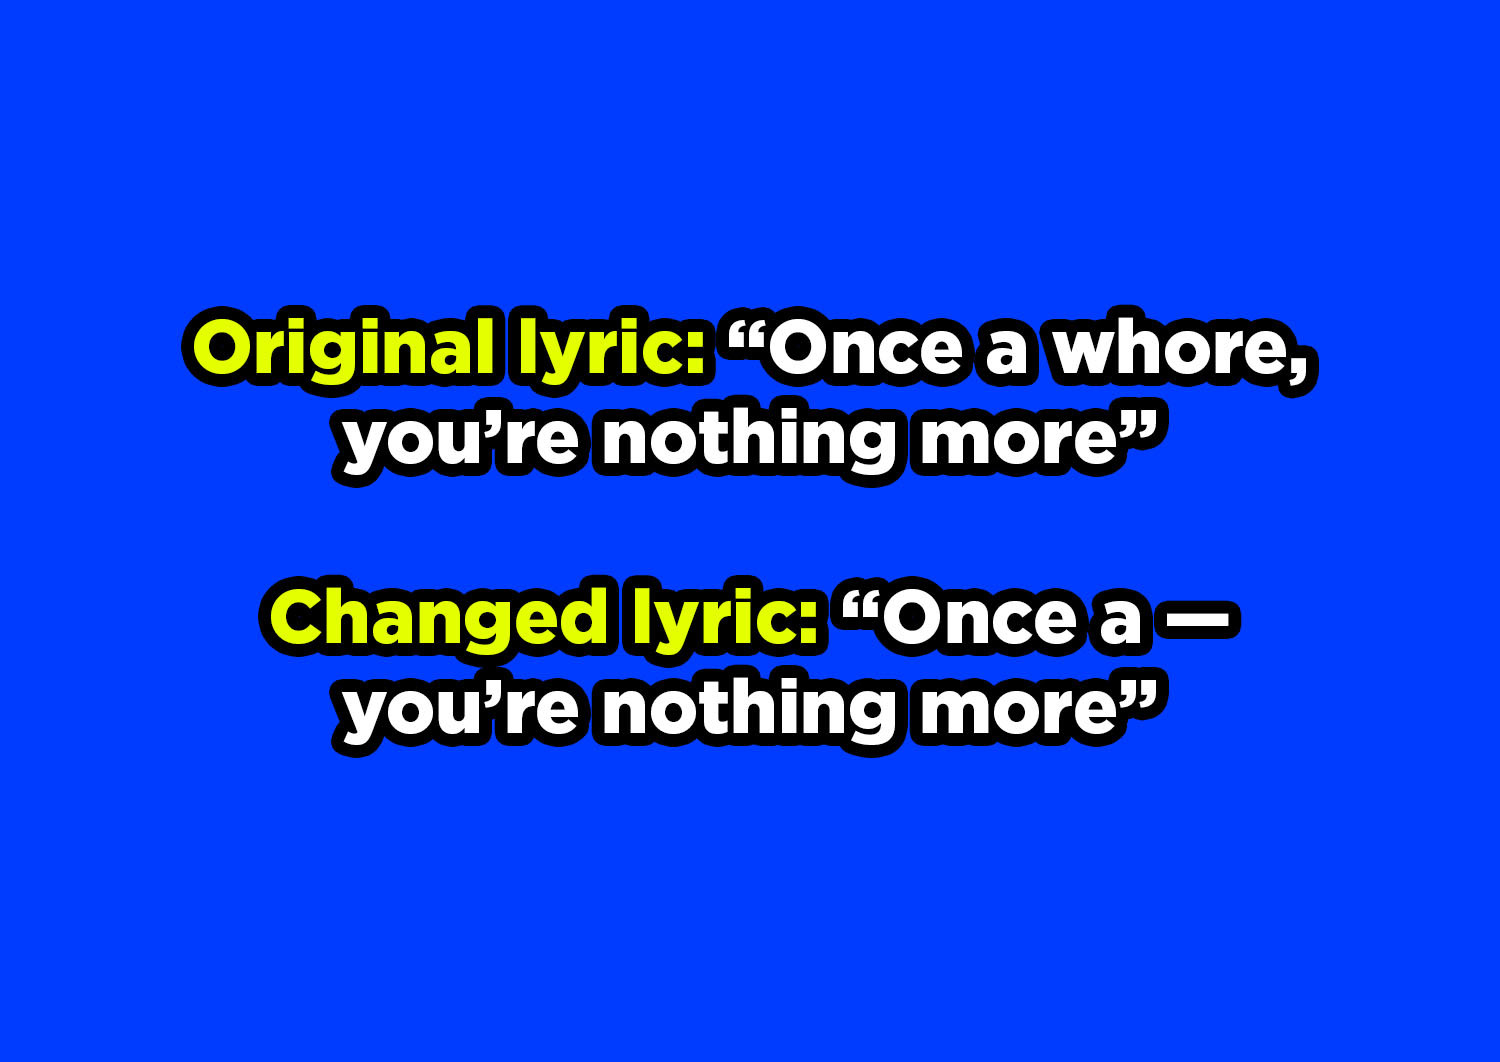 &quot;Whore&quot; changed to a dash&quot; in the original lyric &quot;Once a whore, you&#x27;re nothing more&quot;